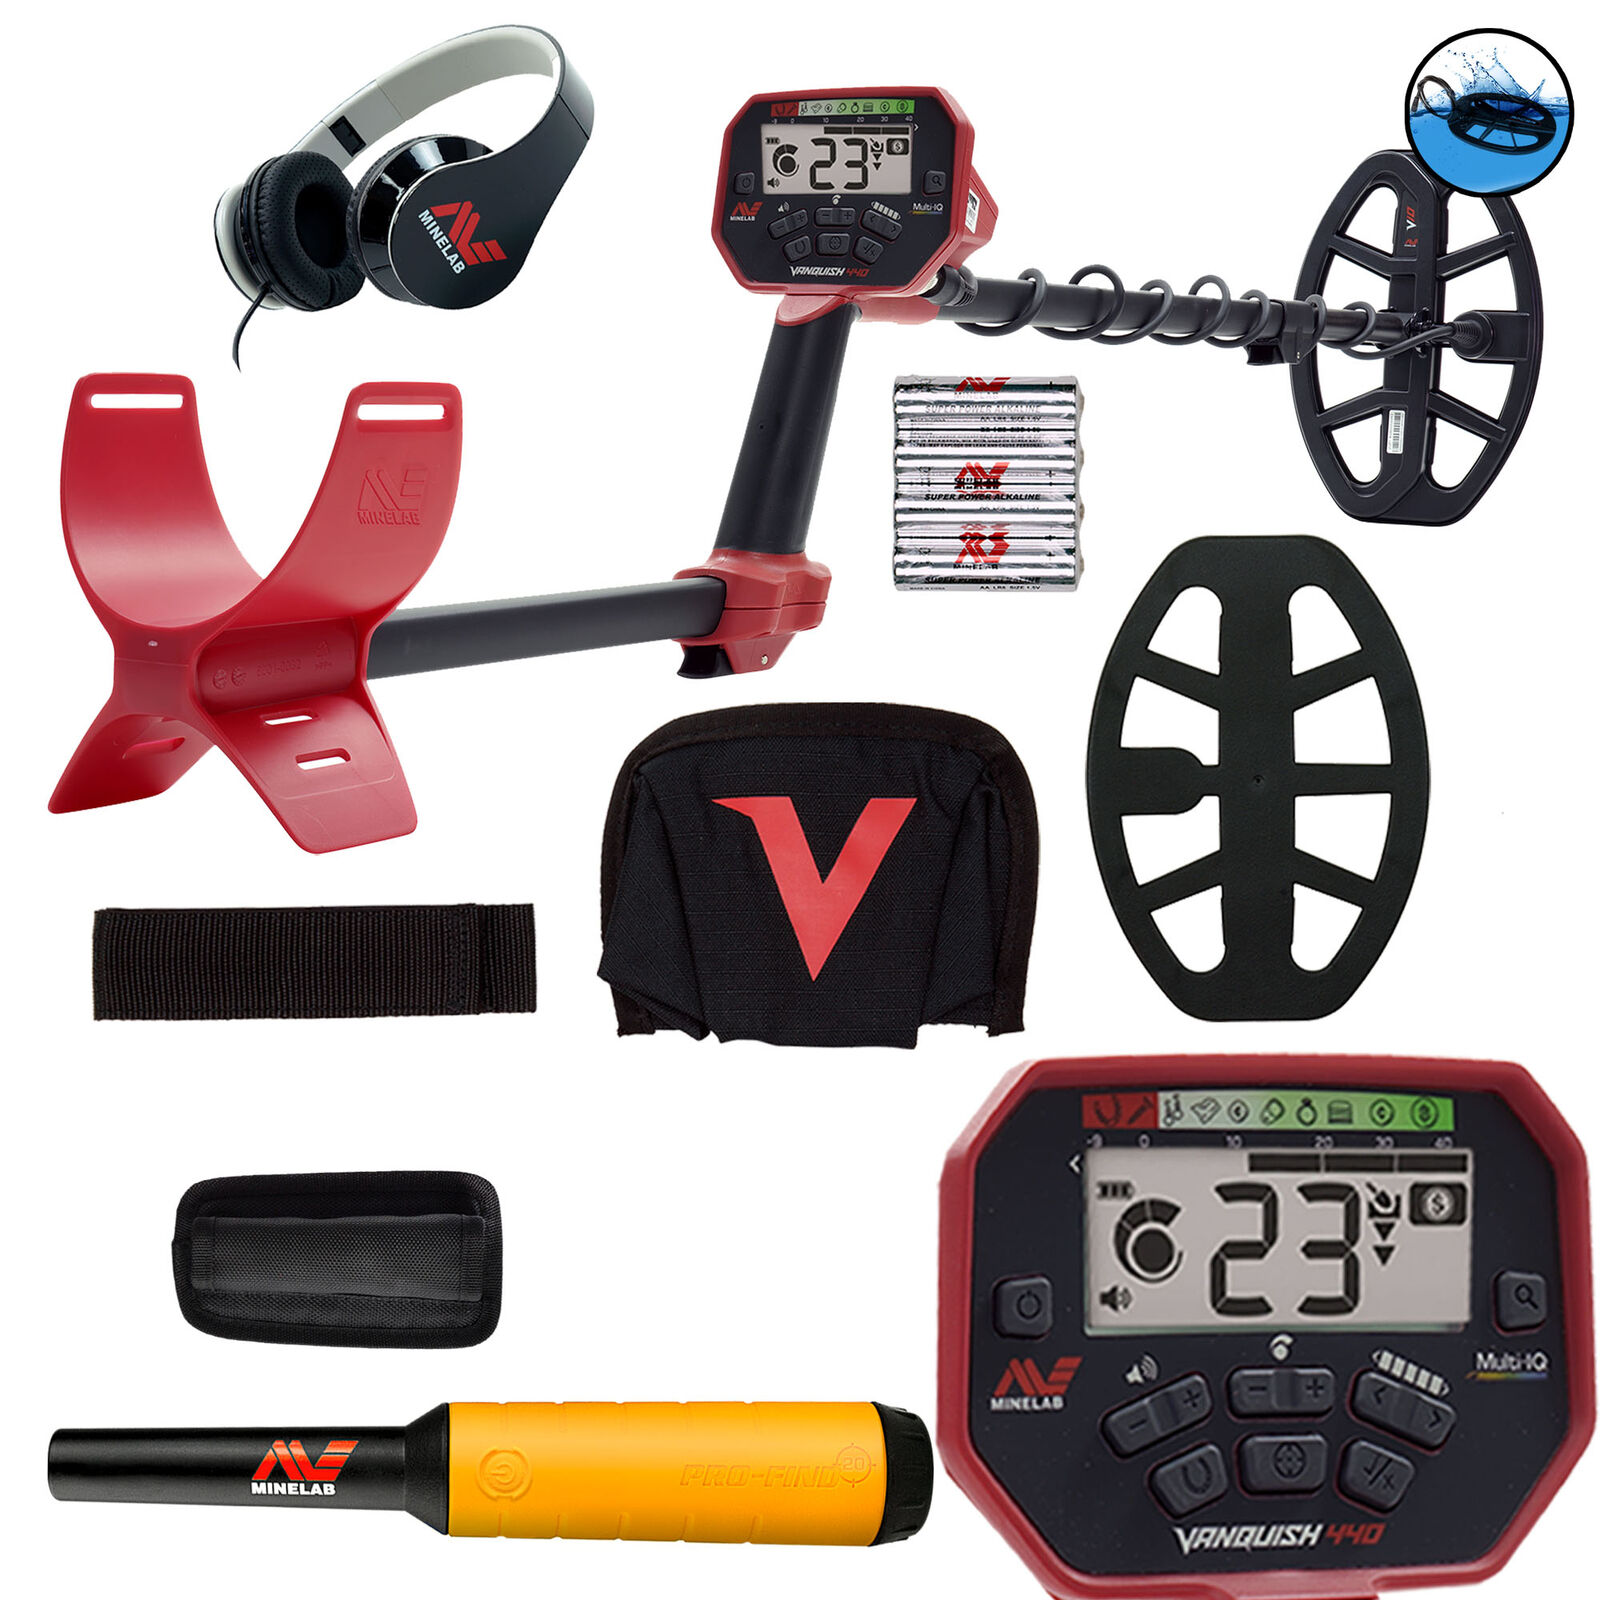 Minelab VANQUISH 440 Detector with 10 x 7 Coil and Pro-Find 20 Pinpointer